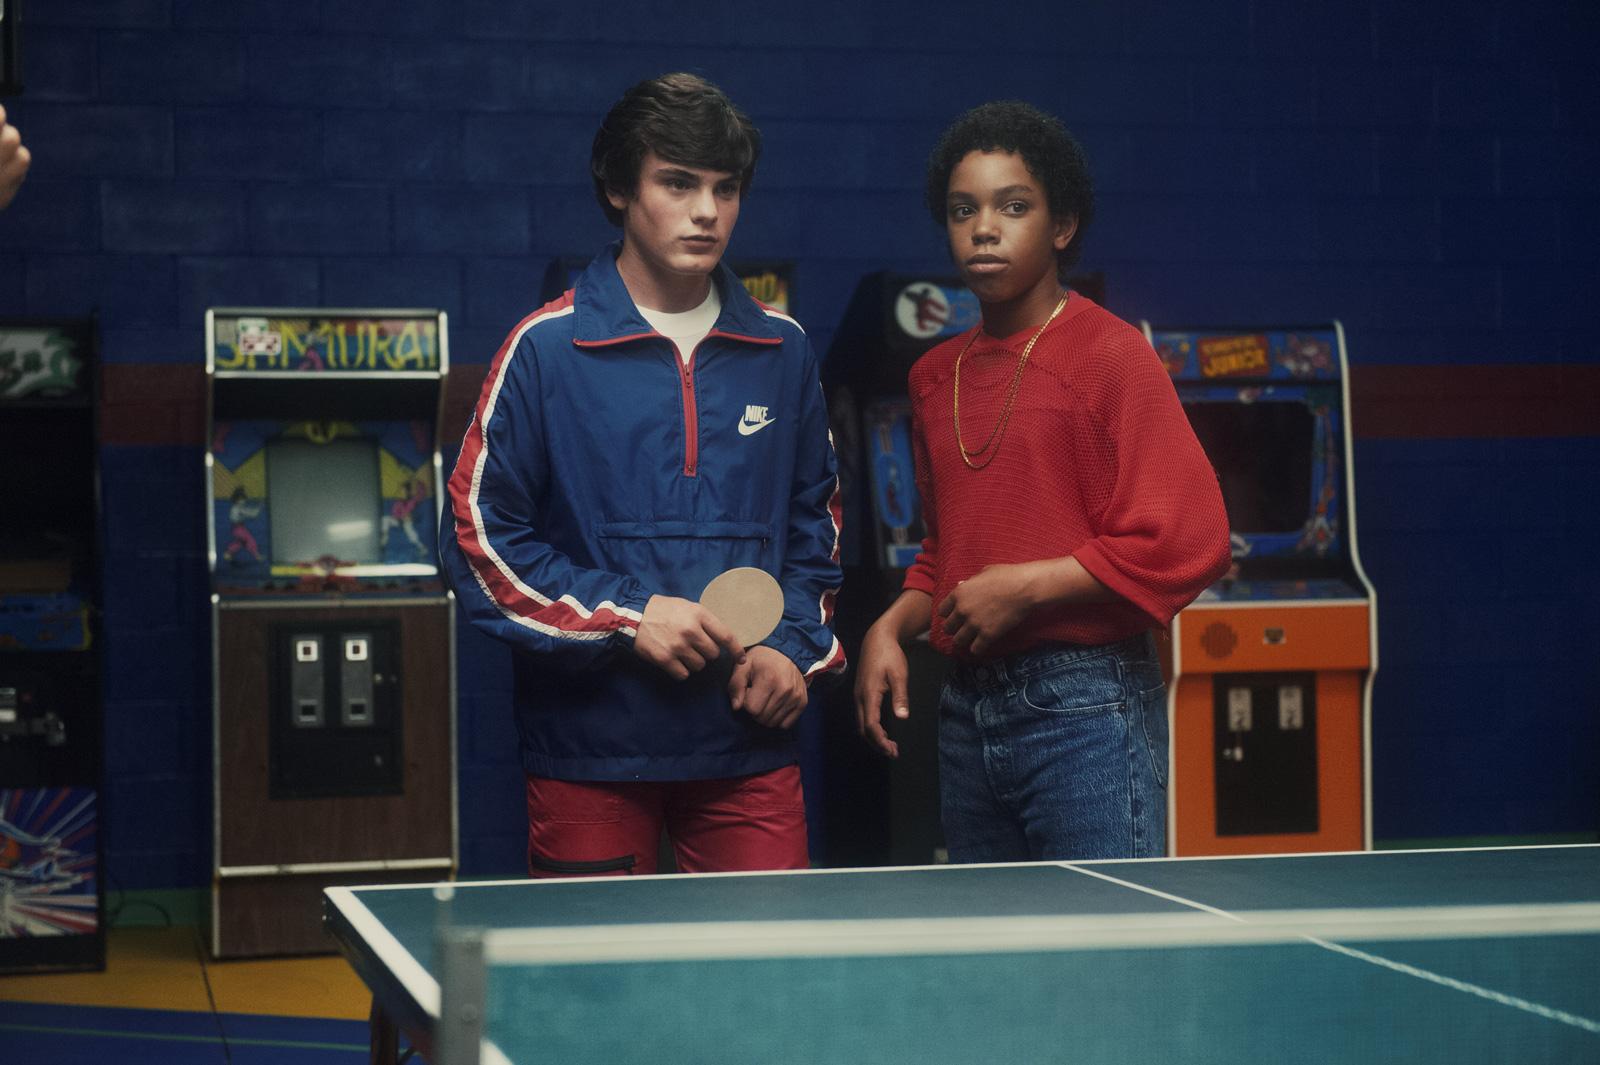 Ping pong summer, le charme discret des eighties